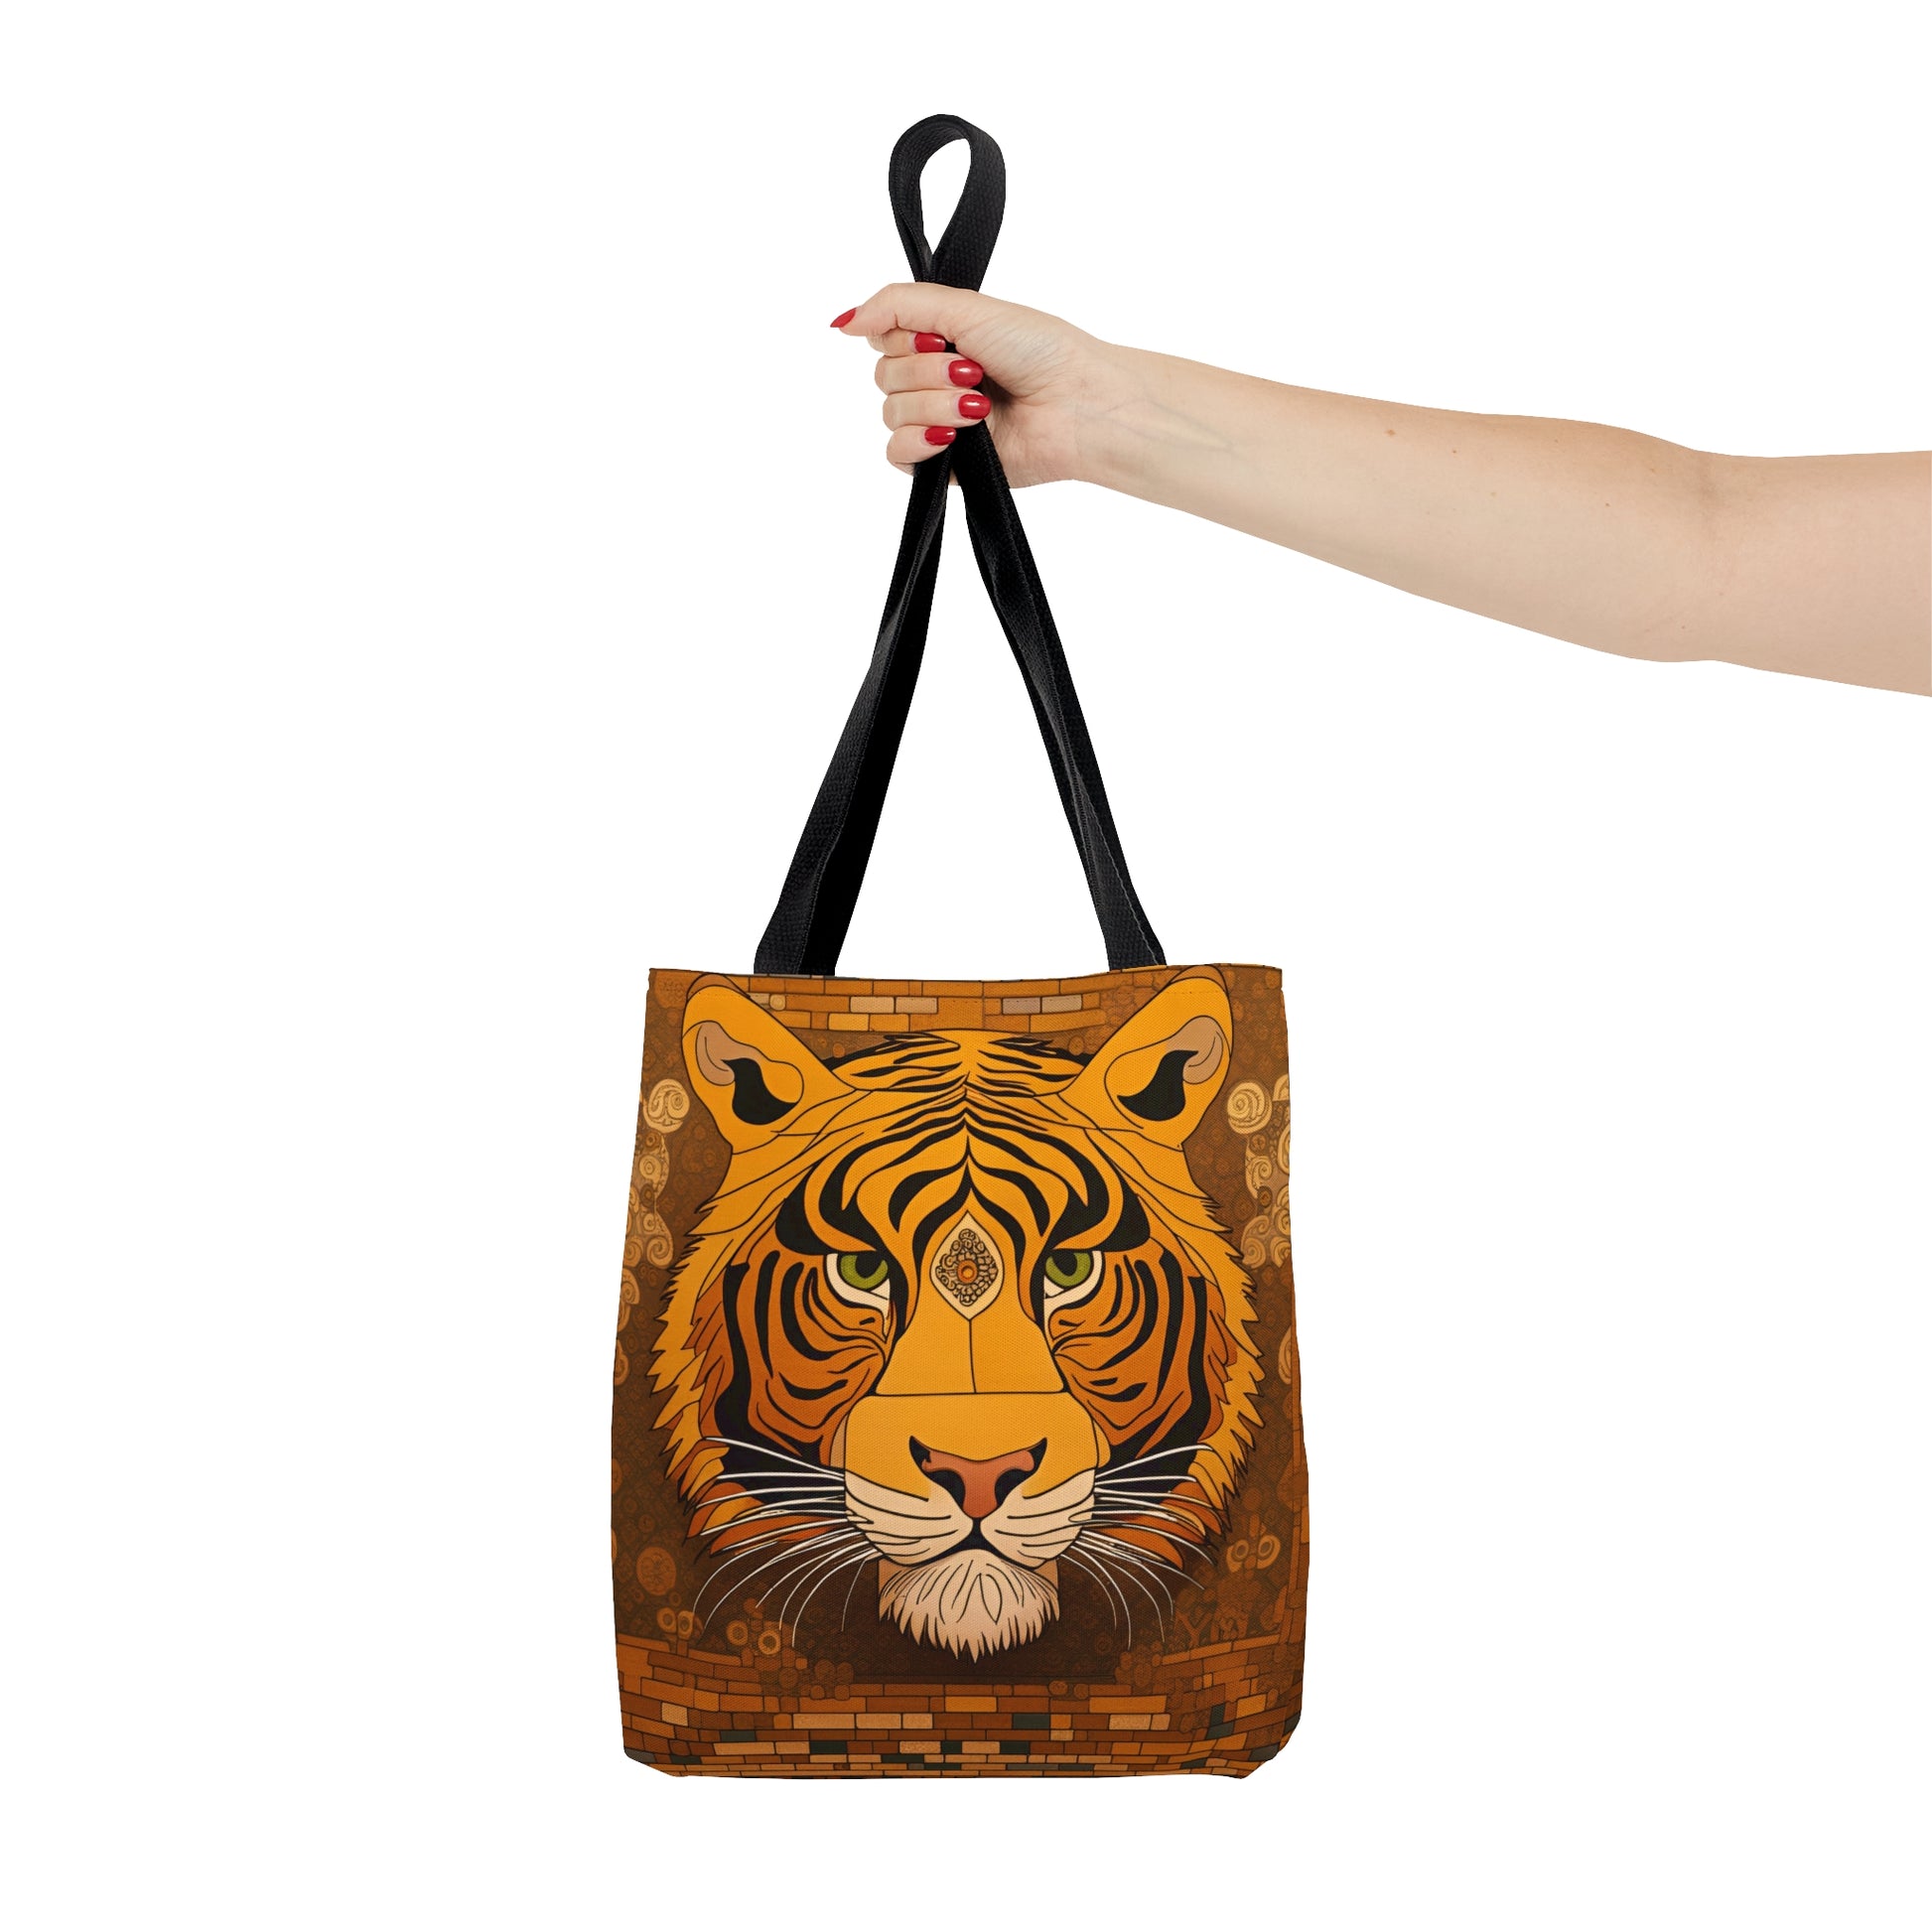 Tiger Head in the Style of Gustav Klimt Printed on Tote Bag small held